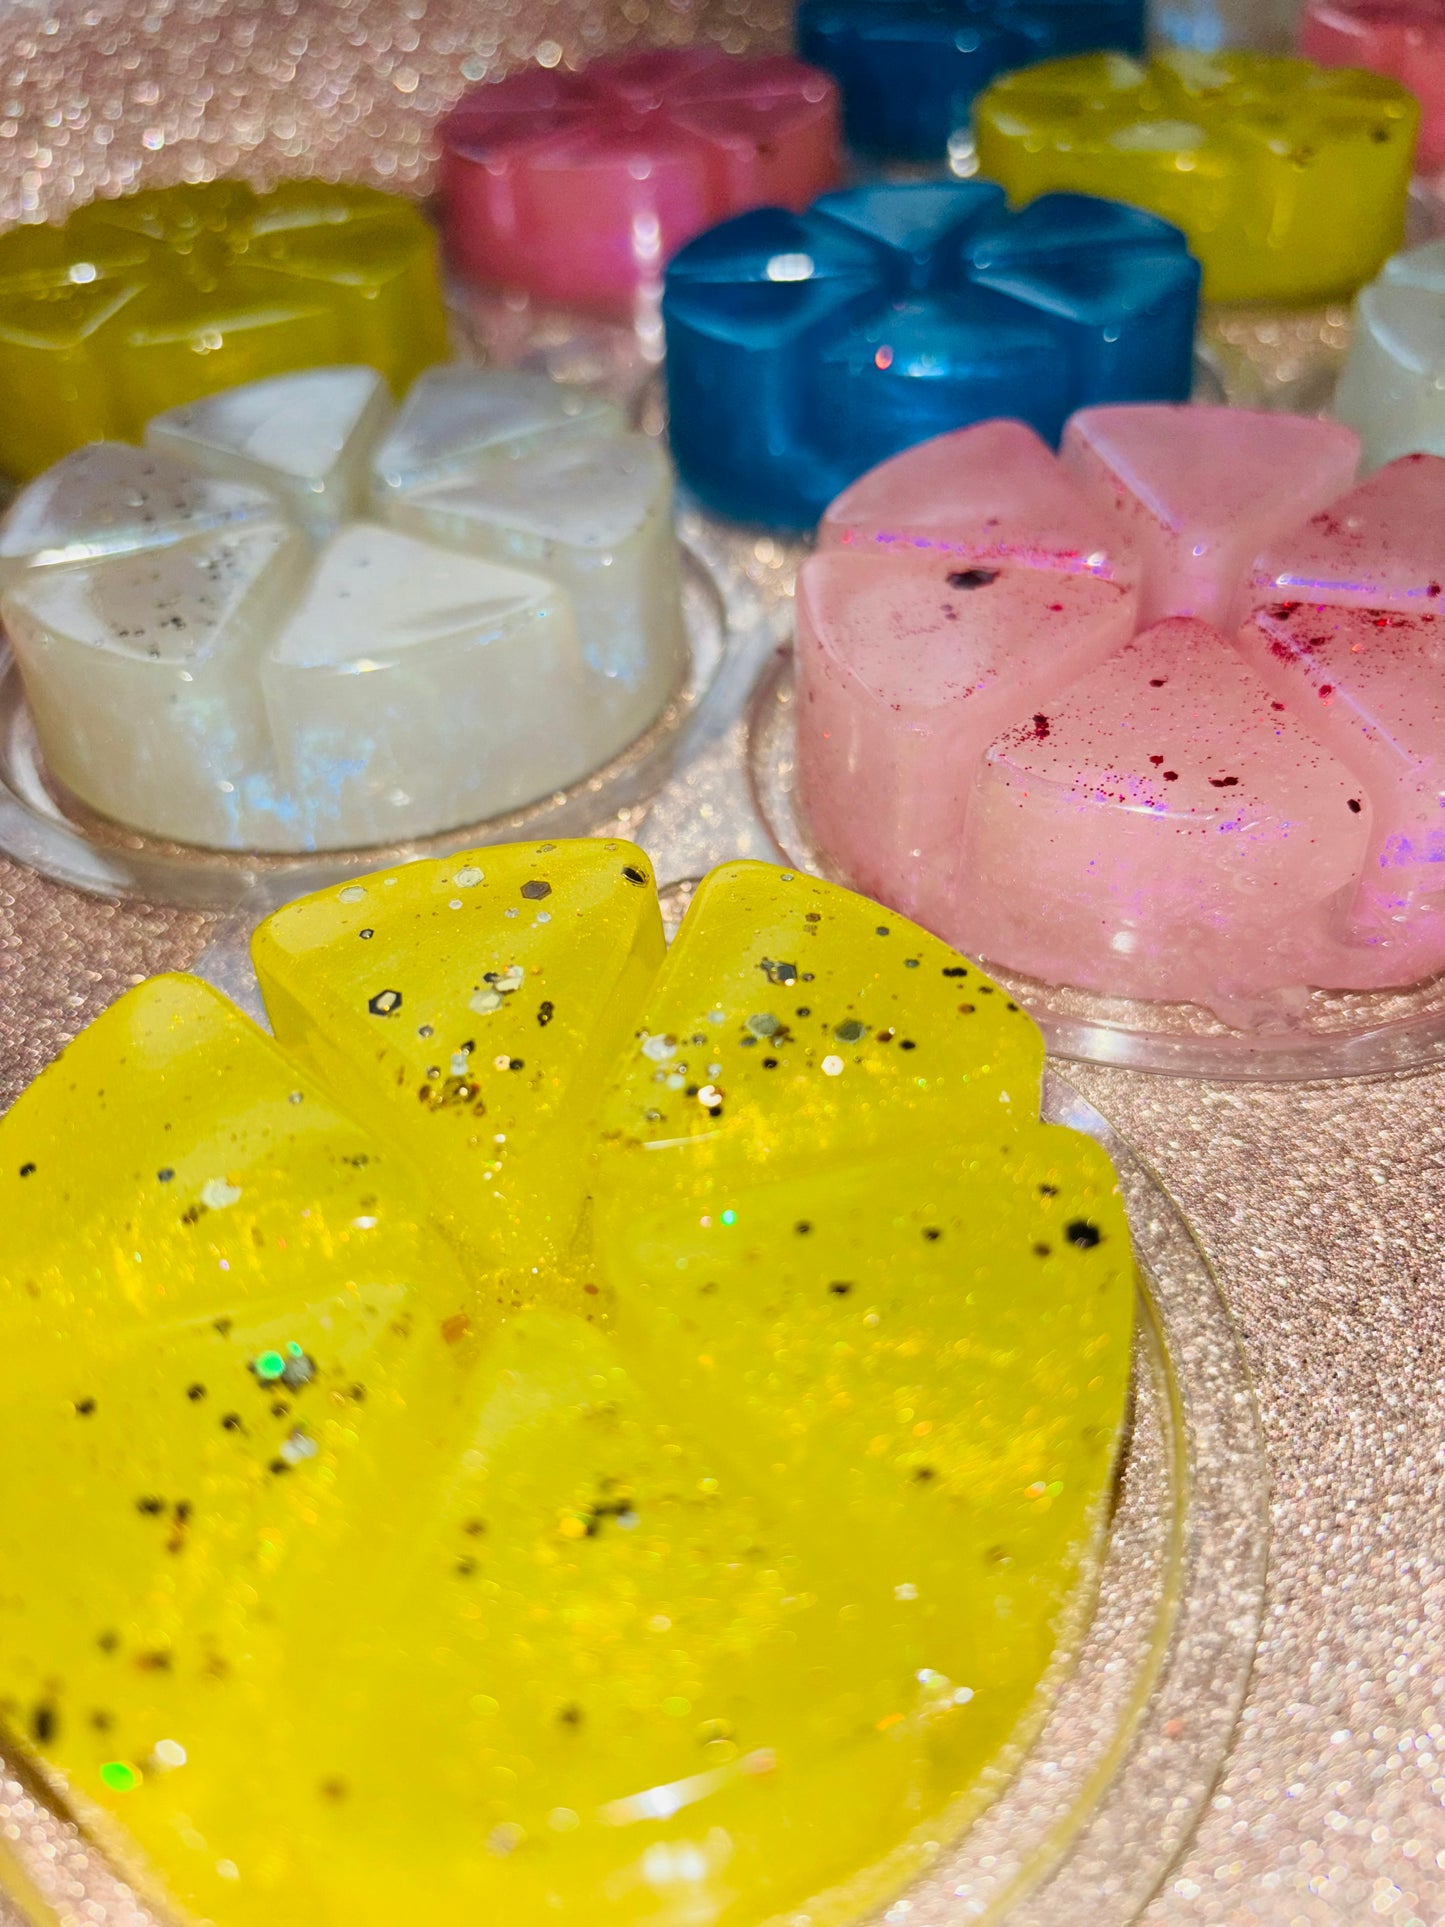 Colorful resin art pieces with glitter, displayed on a glittery surface, featuring various shapes and vibrant hues of highly scented The Soap Gal x Gel Wax Melts 100g / Jelly Wax Melts 100g fragrances.